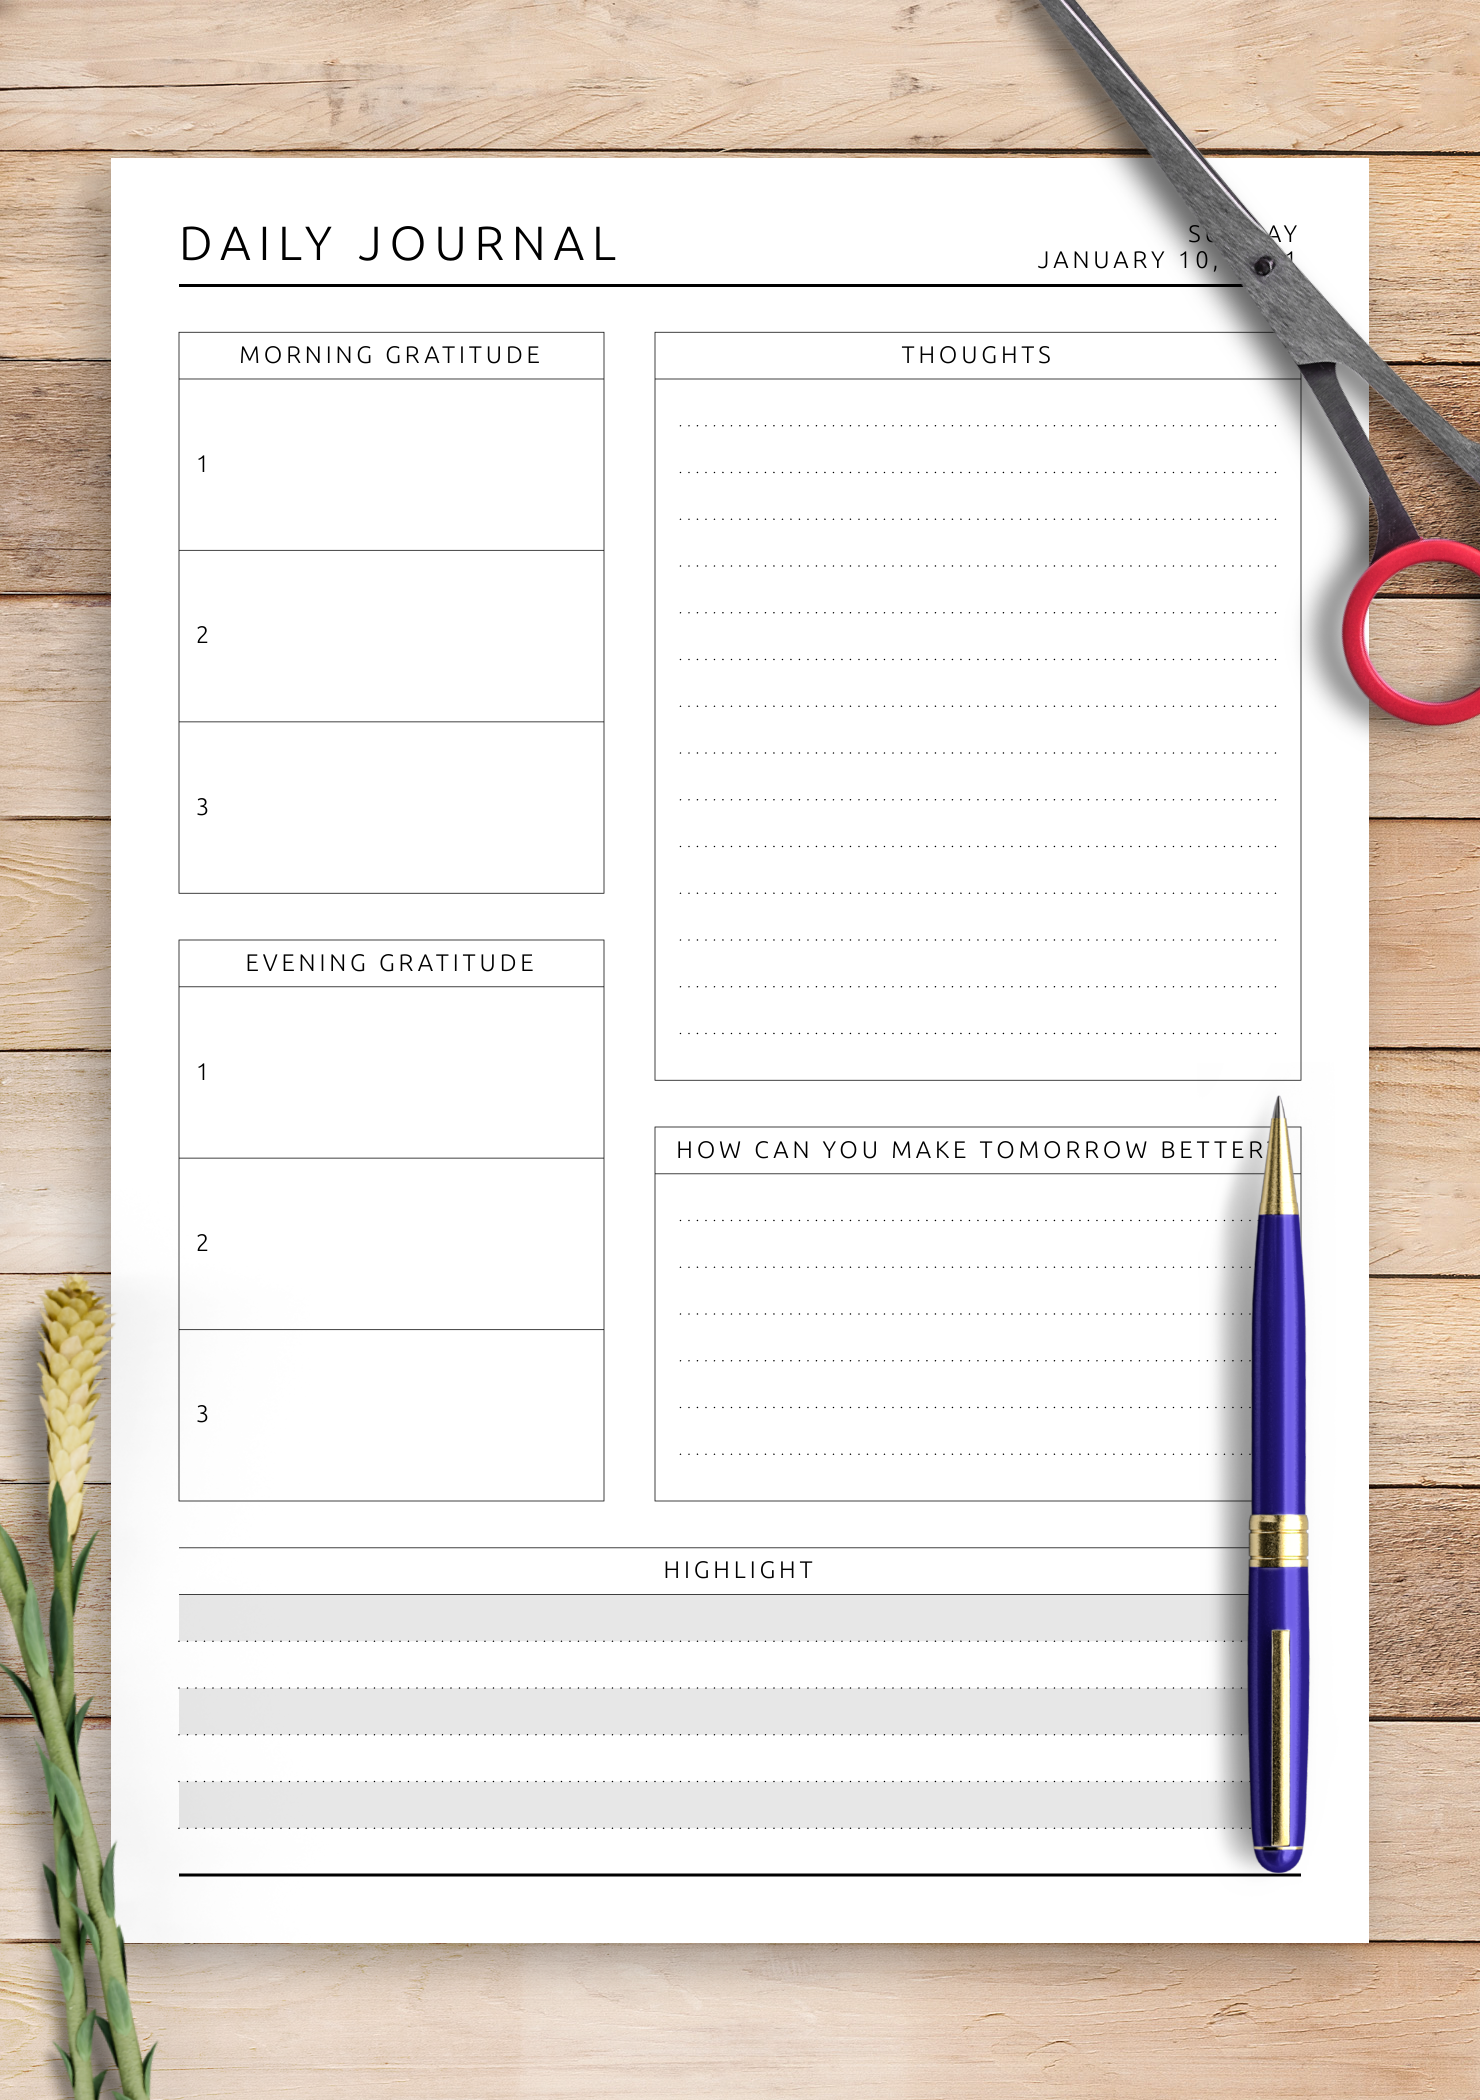 free-digital-planner-goodnotes-laderunited